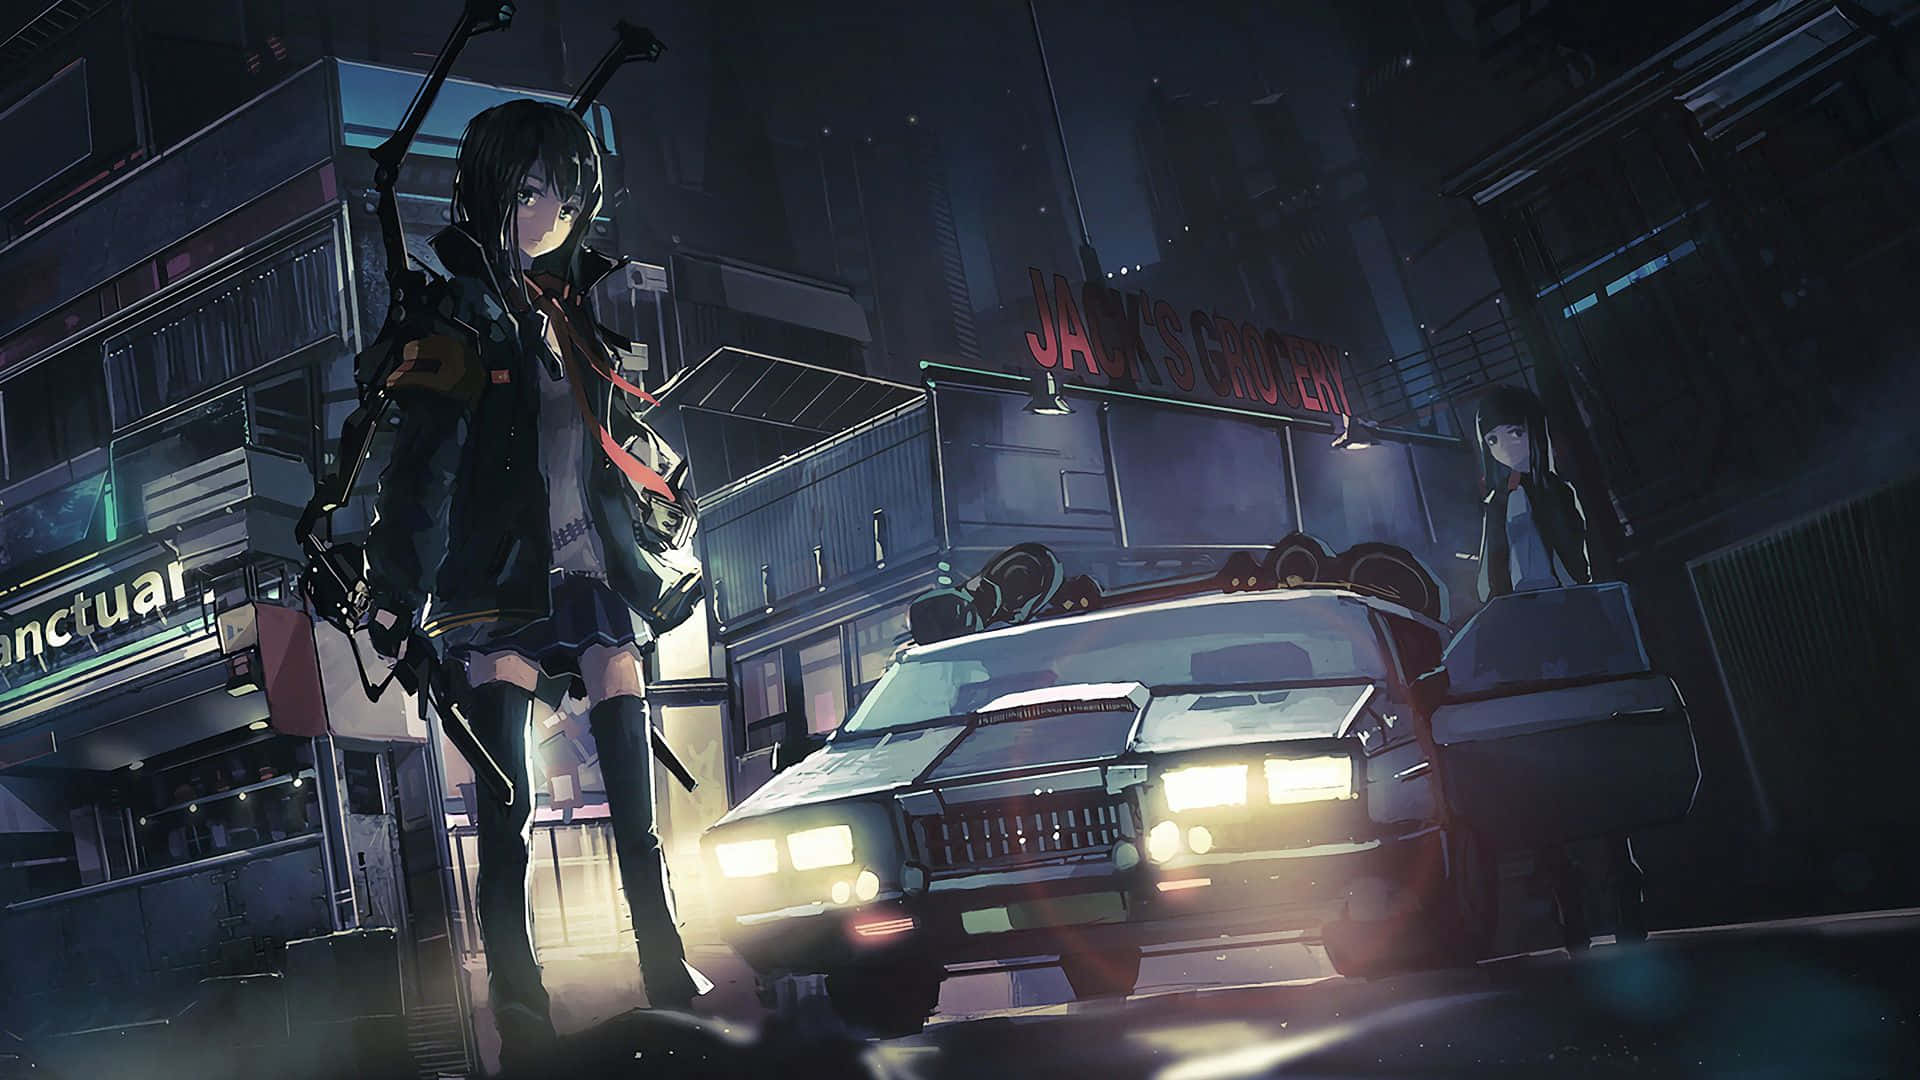 A Girl Standing In Front Of A Car In A City